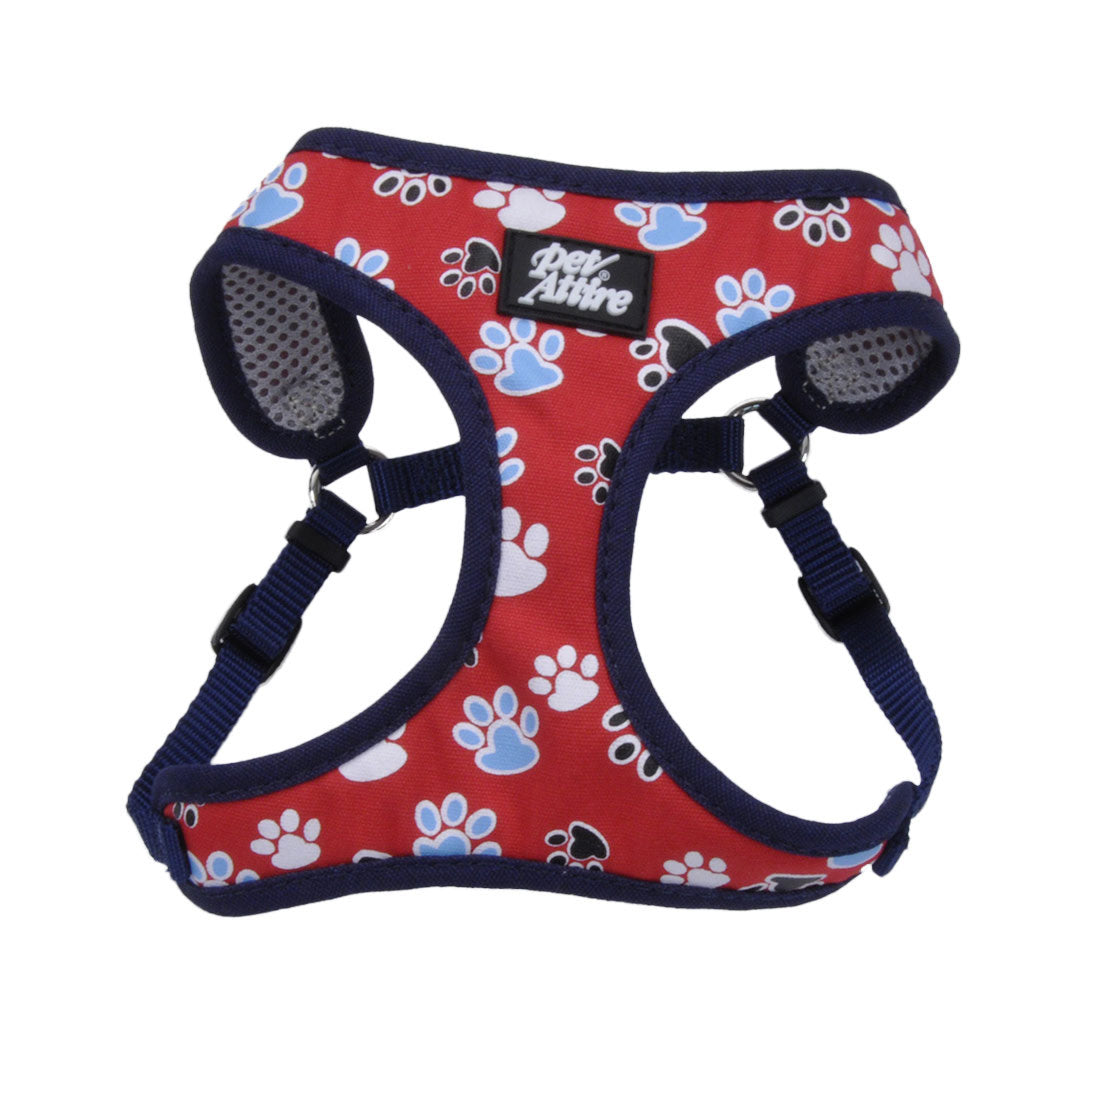 Coastal Ribbon Adjustable Dog Harness Red with Paws XS